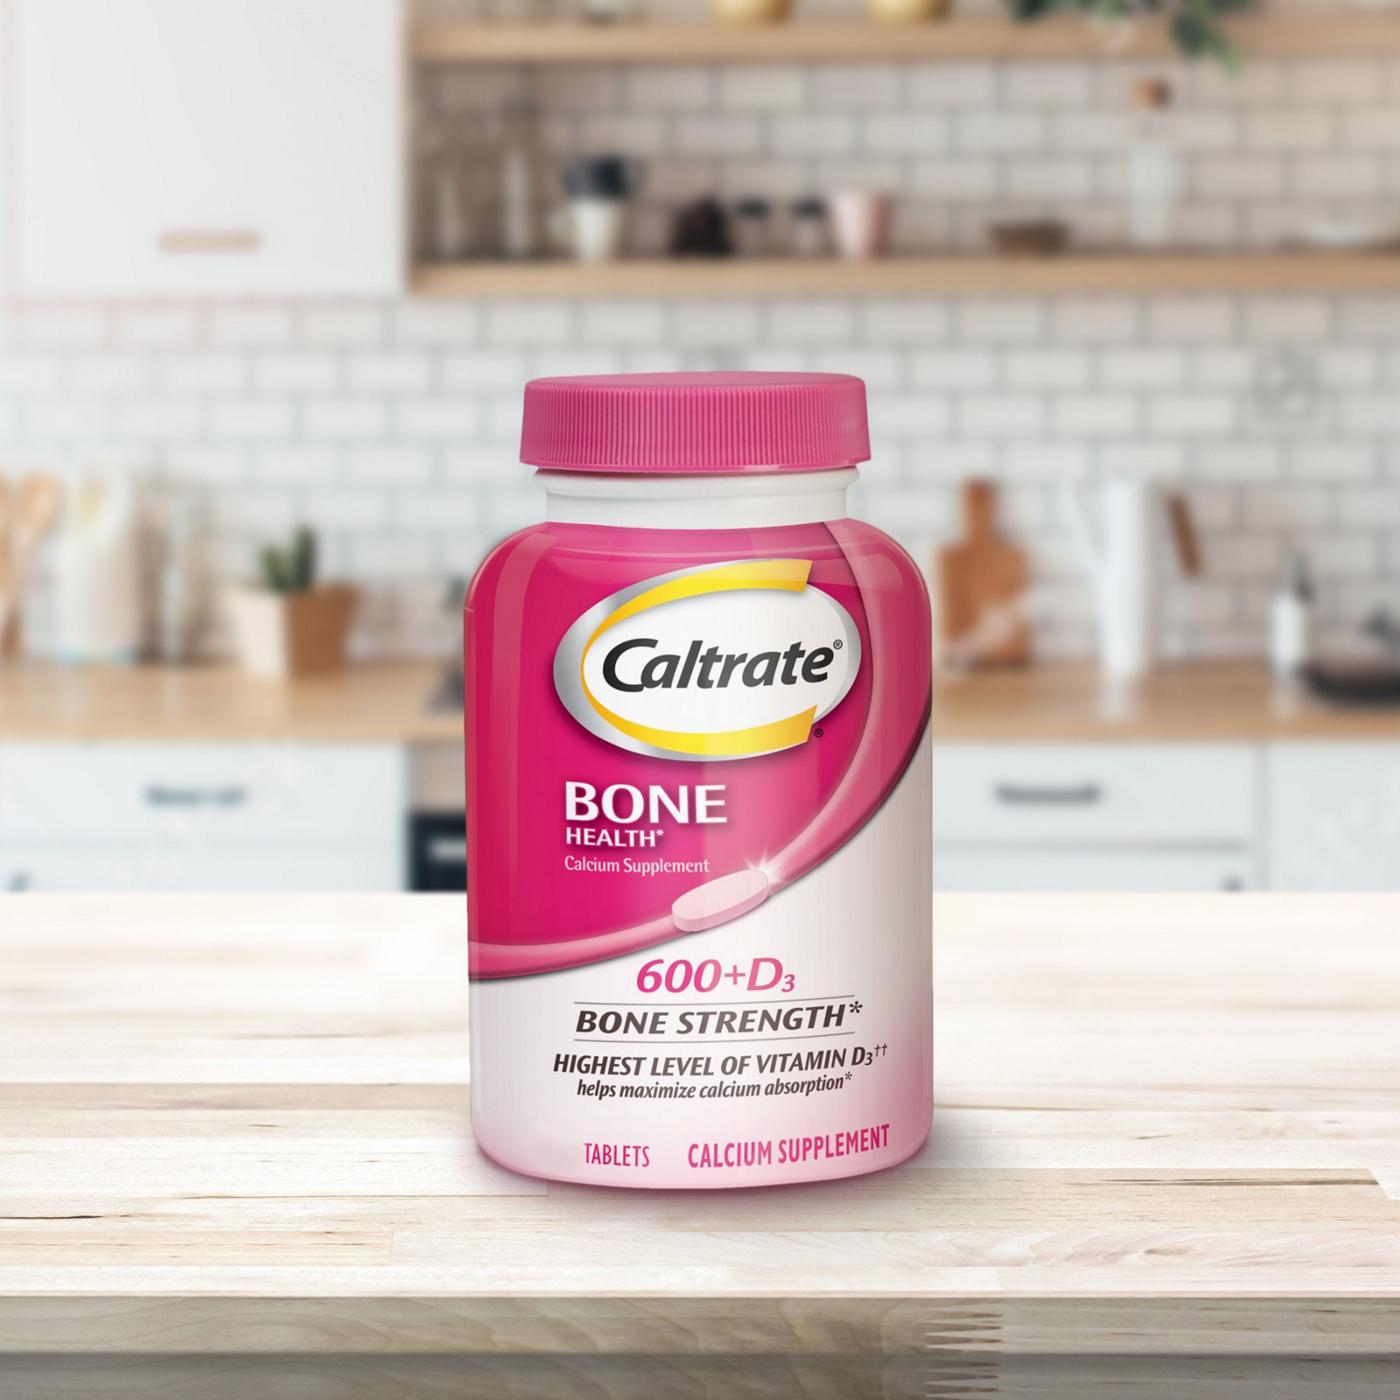 Caltrate 600+D3 Bone Strength Calcium Supplement Tablets; image 5 of 5